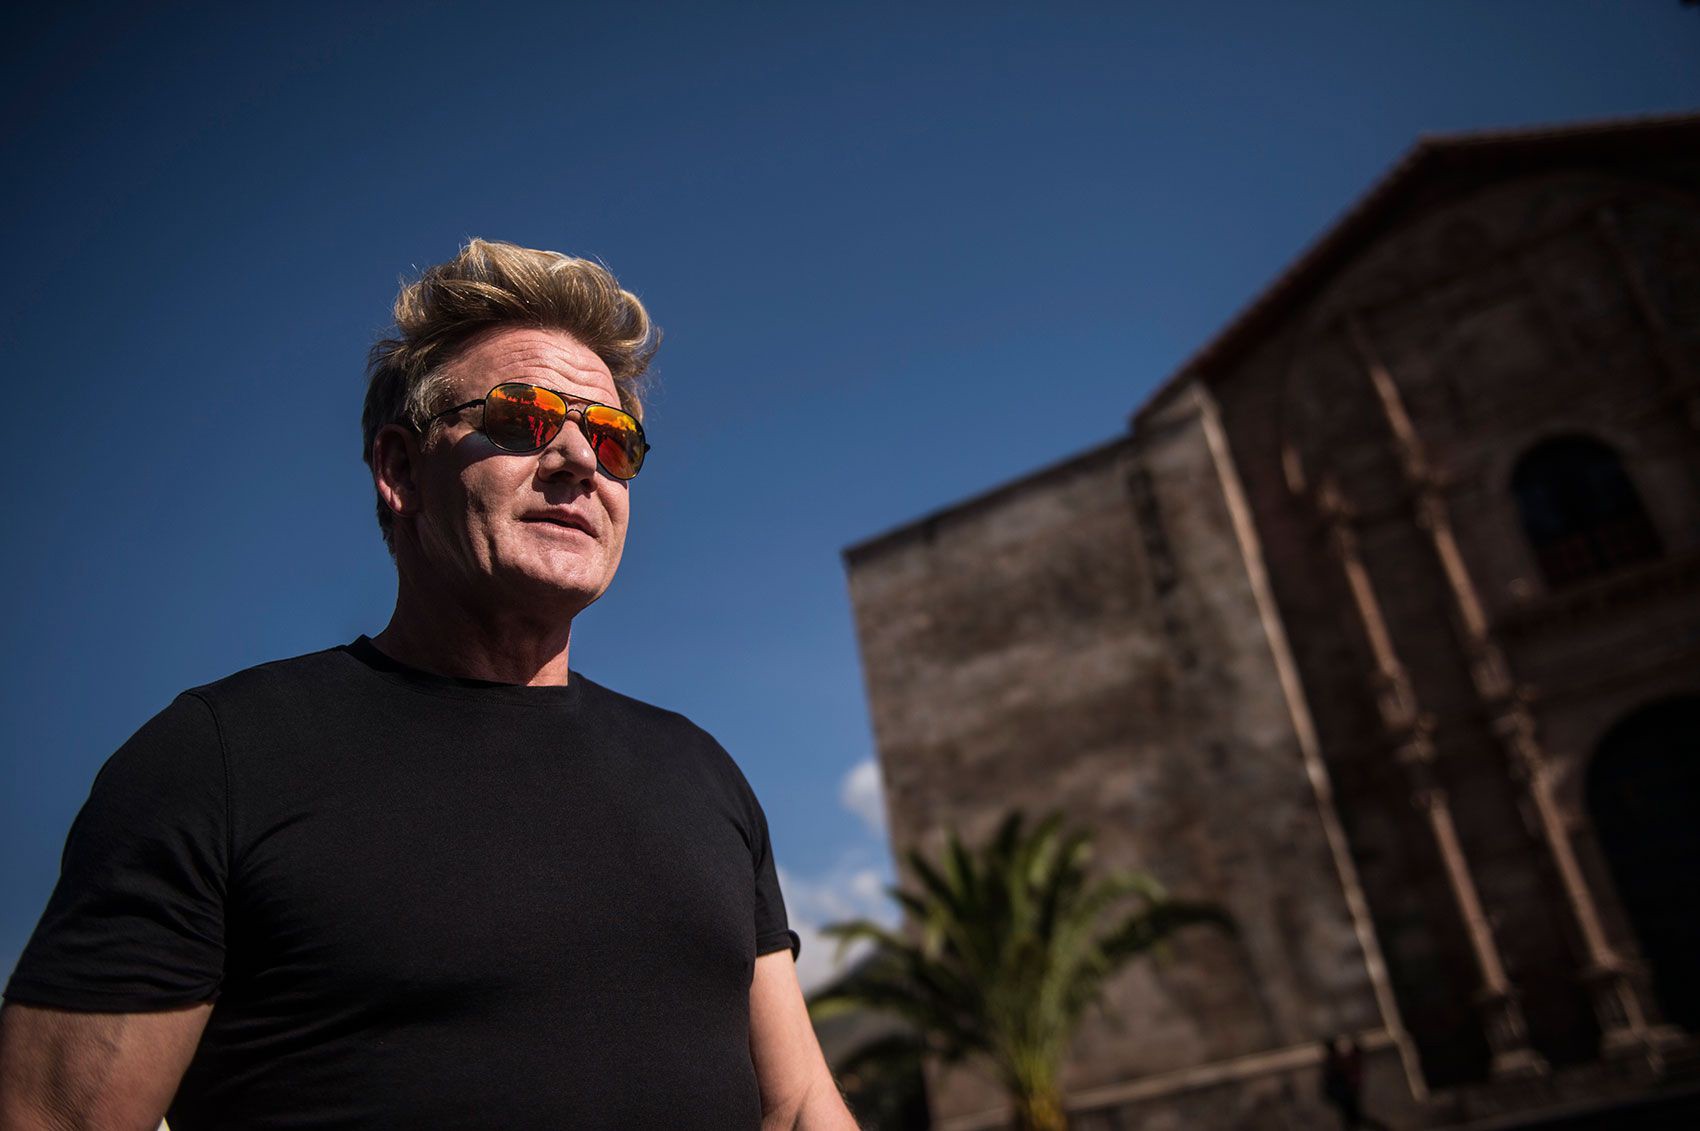 The National Geographic series Gordon Ramsay: Uncharted offers a cuddlier version of the fiery chef exploring the food cultures of Peru, New Zealand and Morocco. It could become compelling viewing. Photo: Ernesto Benavides/National Geographic